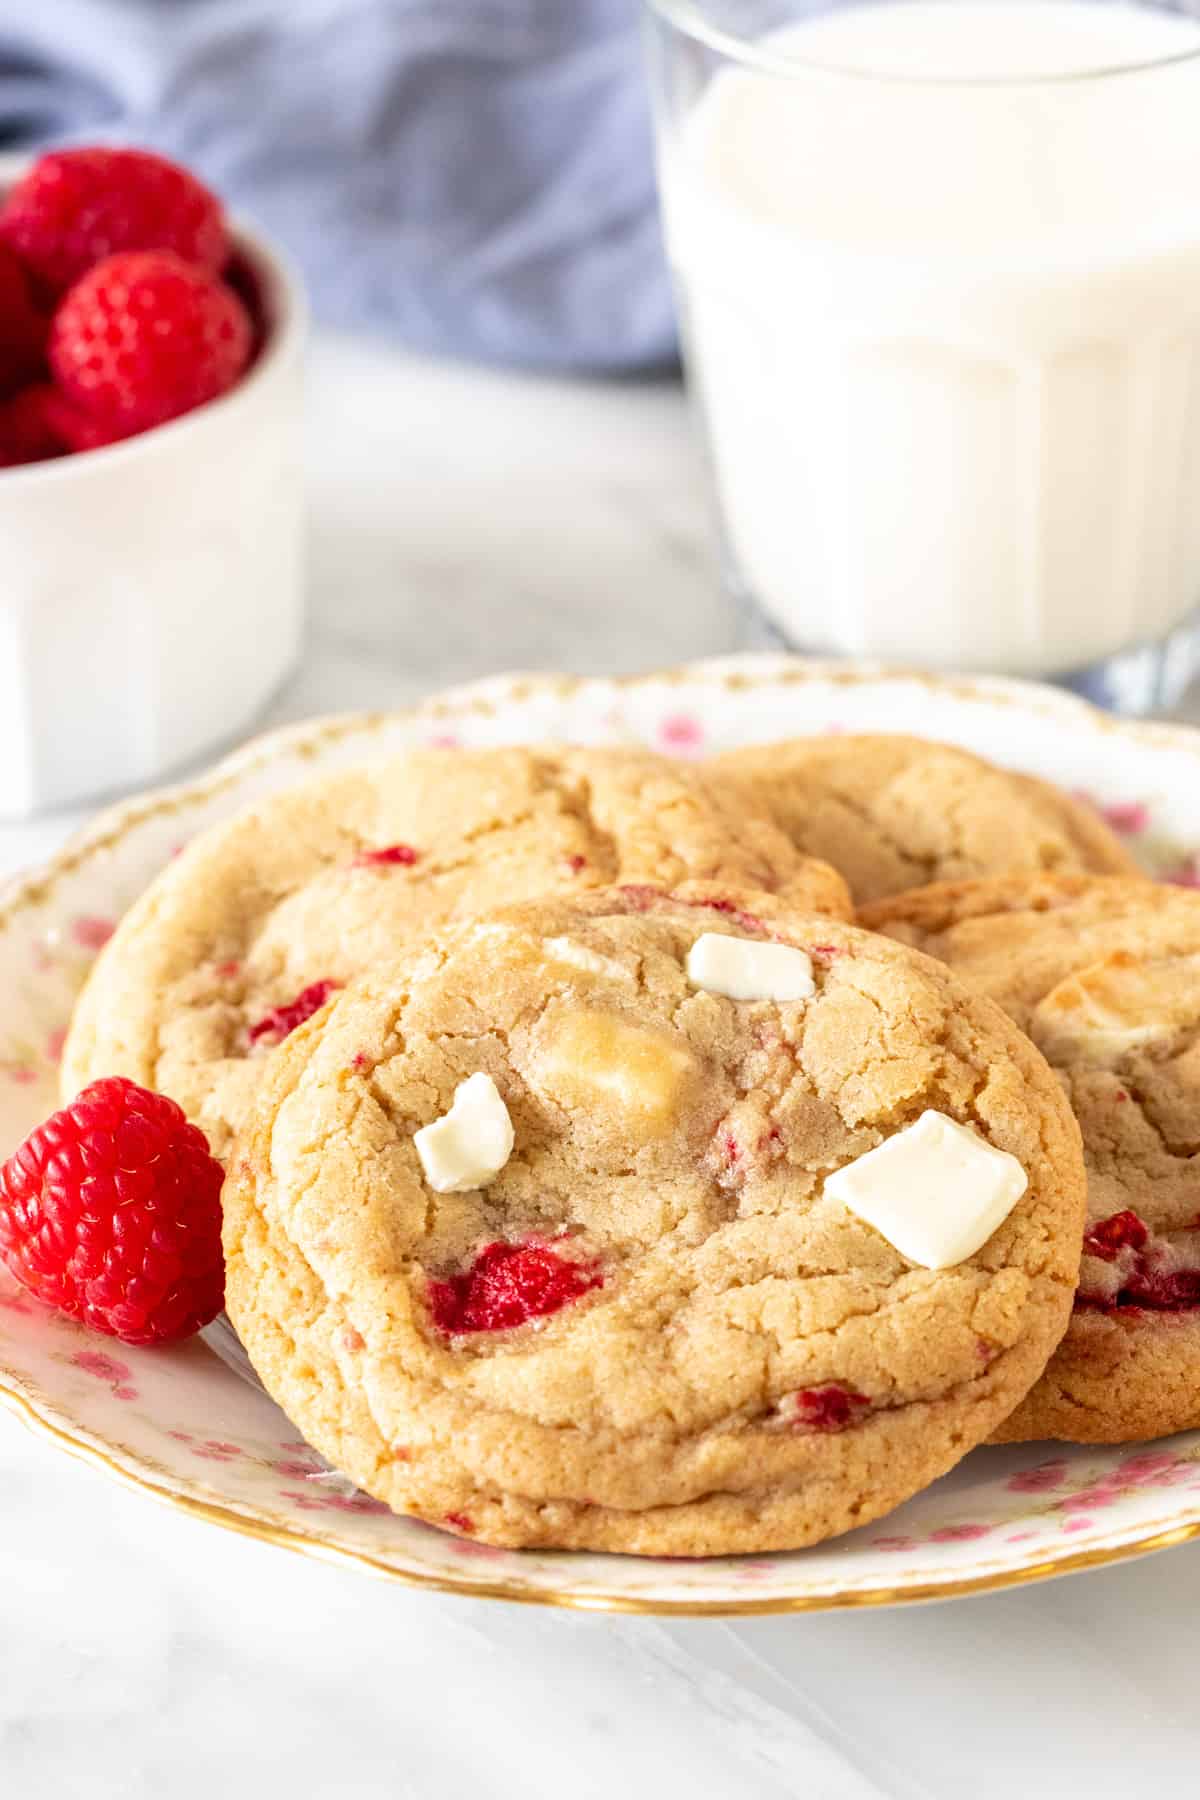 Plate of raspberry white chocolate chunk cookies with glass of milk